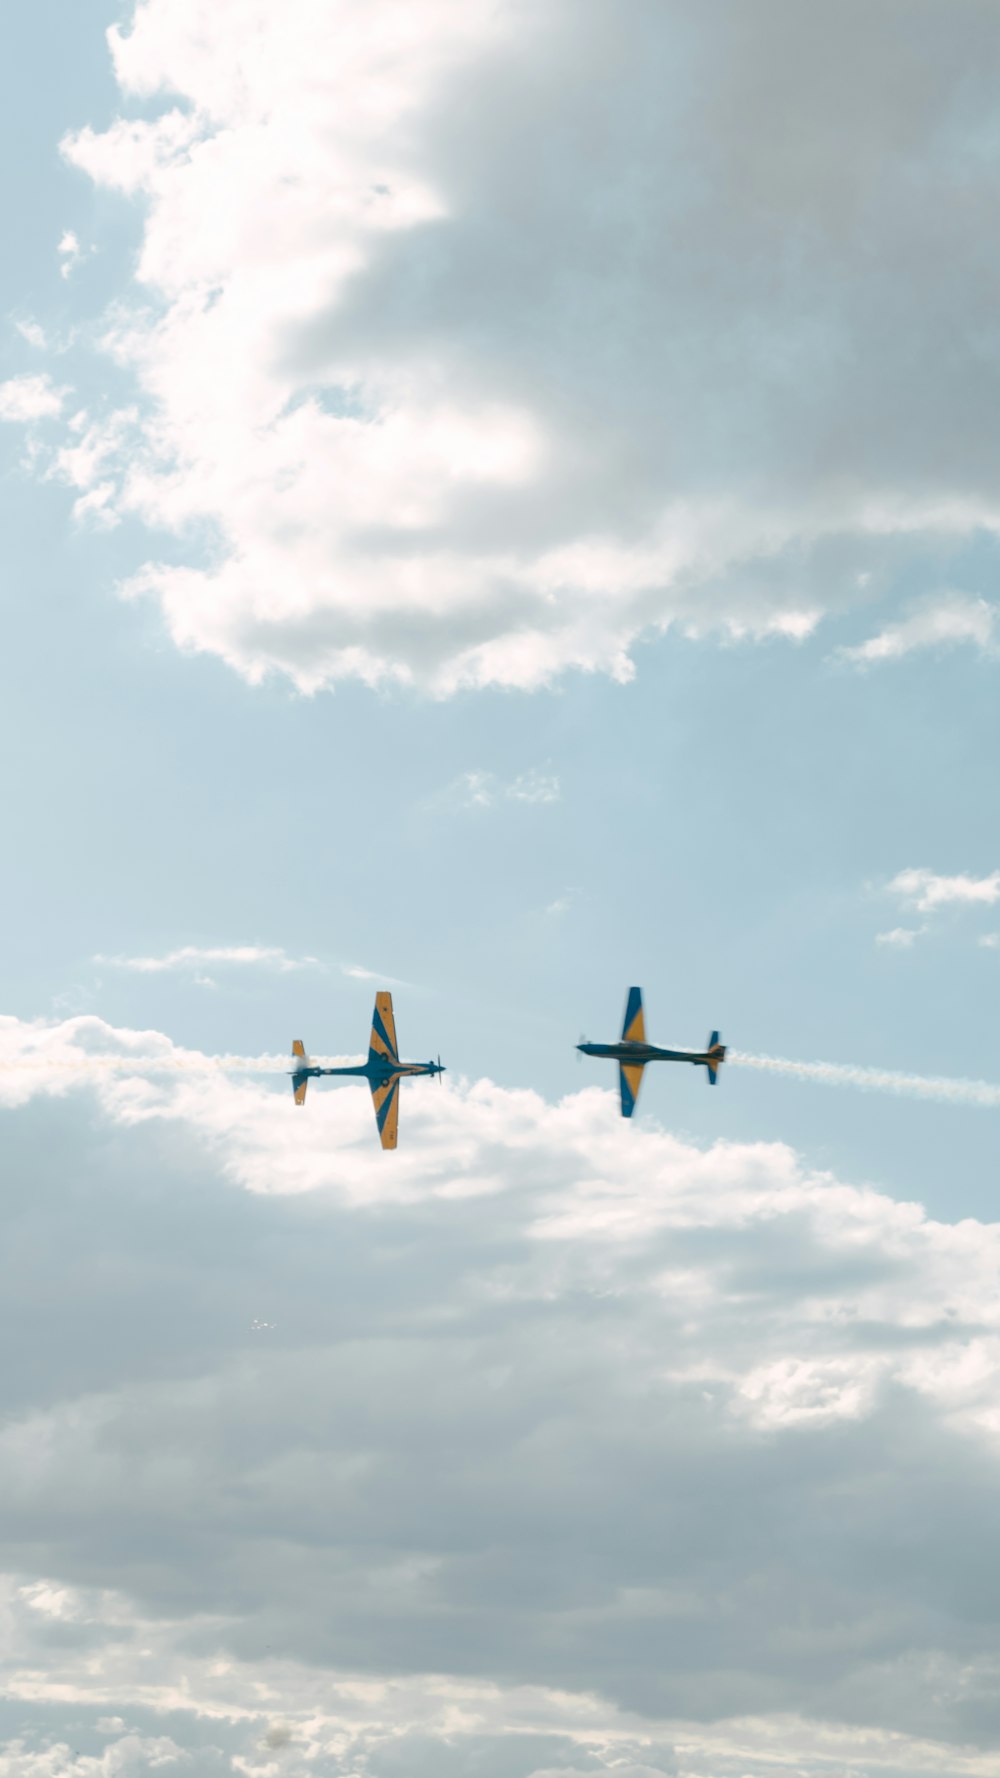 two planes flying in the sky with clouds in the background